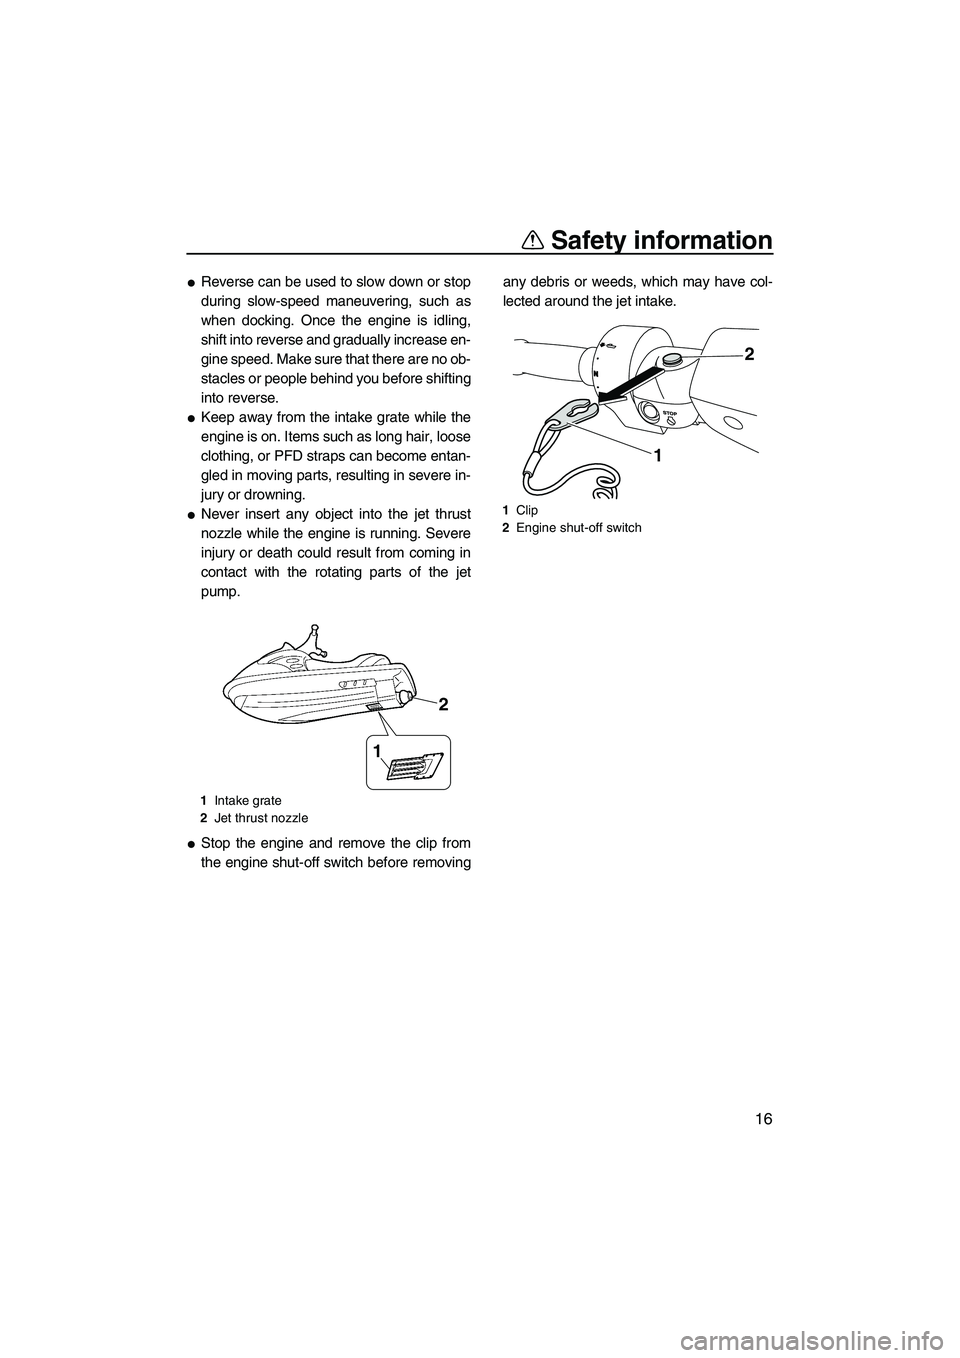 YAMAHA FX SHO 2010  Owners Manual Safety information
16
Reverse can be used to slow down or stop
during slow-speed maneuvering, such as
when docking. Once the engine is idling,
shift into reverse and gradually increase en-
gine speed